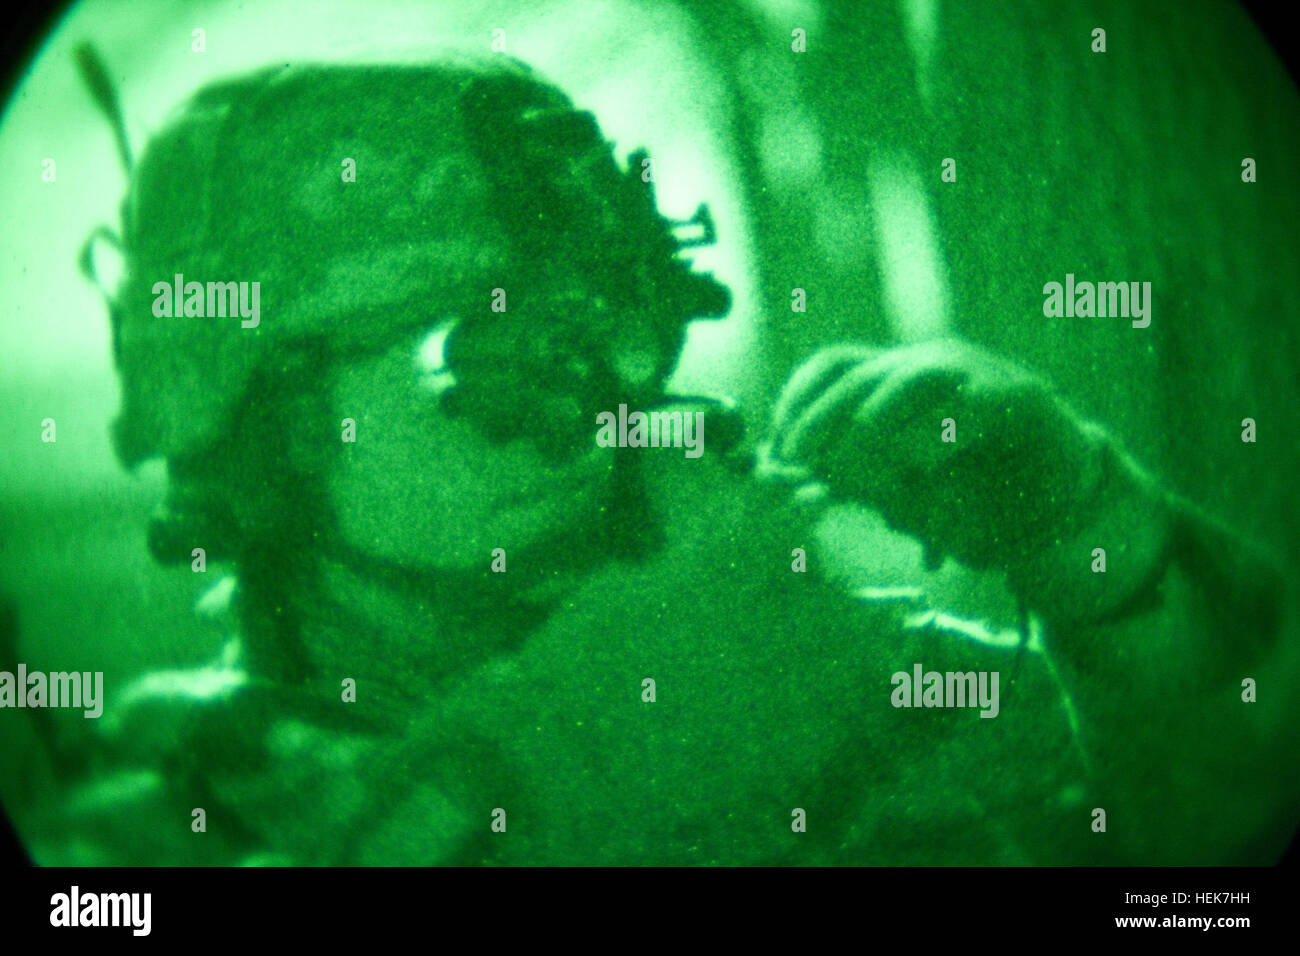 U.S. Army 2nd Lt. George Kane, an infantry officer, 1-506 HHC Mortars, 4th Brigade, 101st Airborne Division, a resident of Seattle, Wash., looks through his monocular night vision optic toward his objective during Operation Gazme Shab 3 Nov. 18, 2010. The purpose for the operation is to assess local activity in the evening hours and gather intel for future operations.  (Photo by: Cpl. Kevin Martin) Gazme Shab 3 342124 Stock Photo